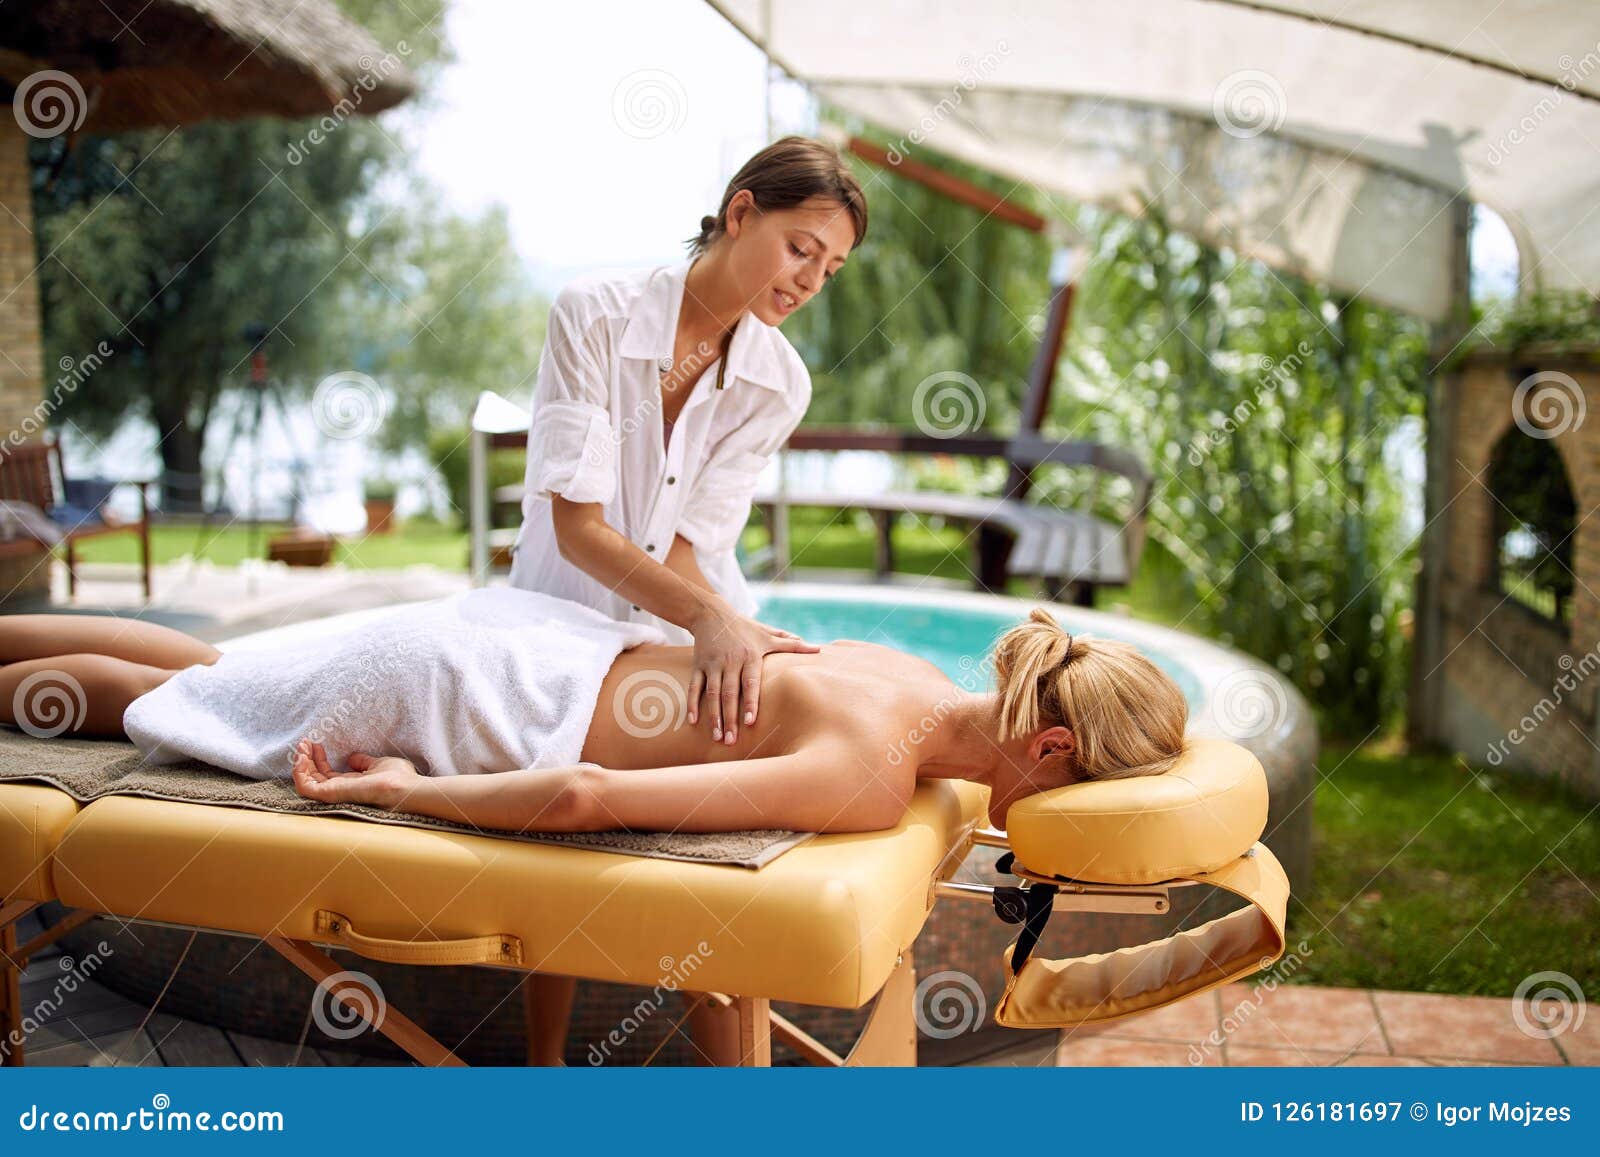 Spa Massage Woman In Spa Salon On Outdoor Getting Massage Stock Image